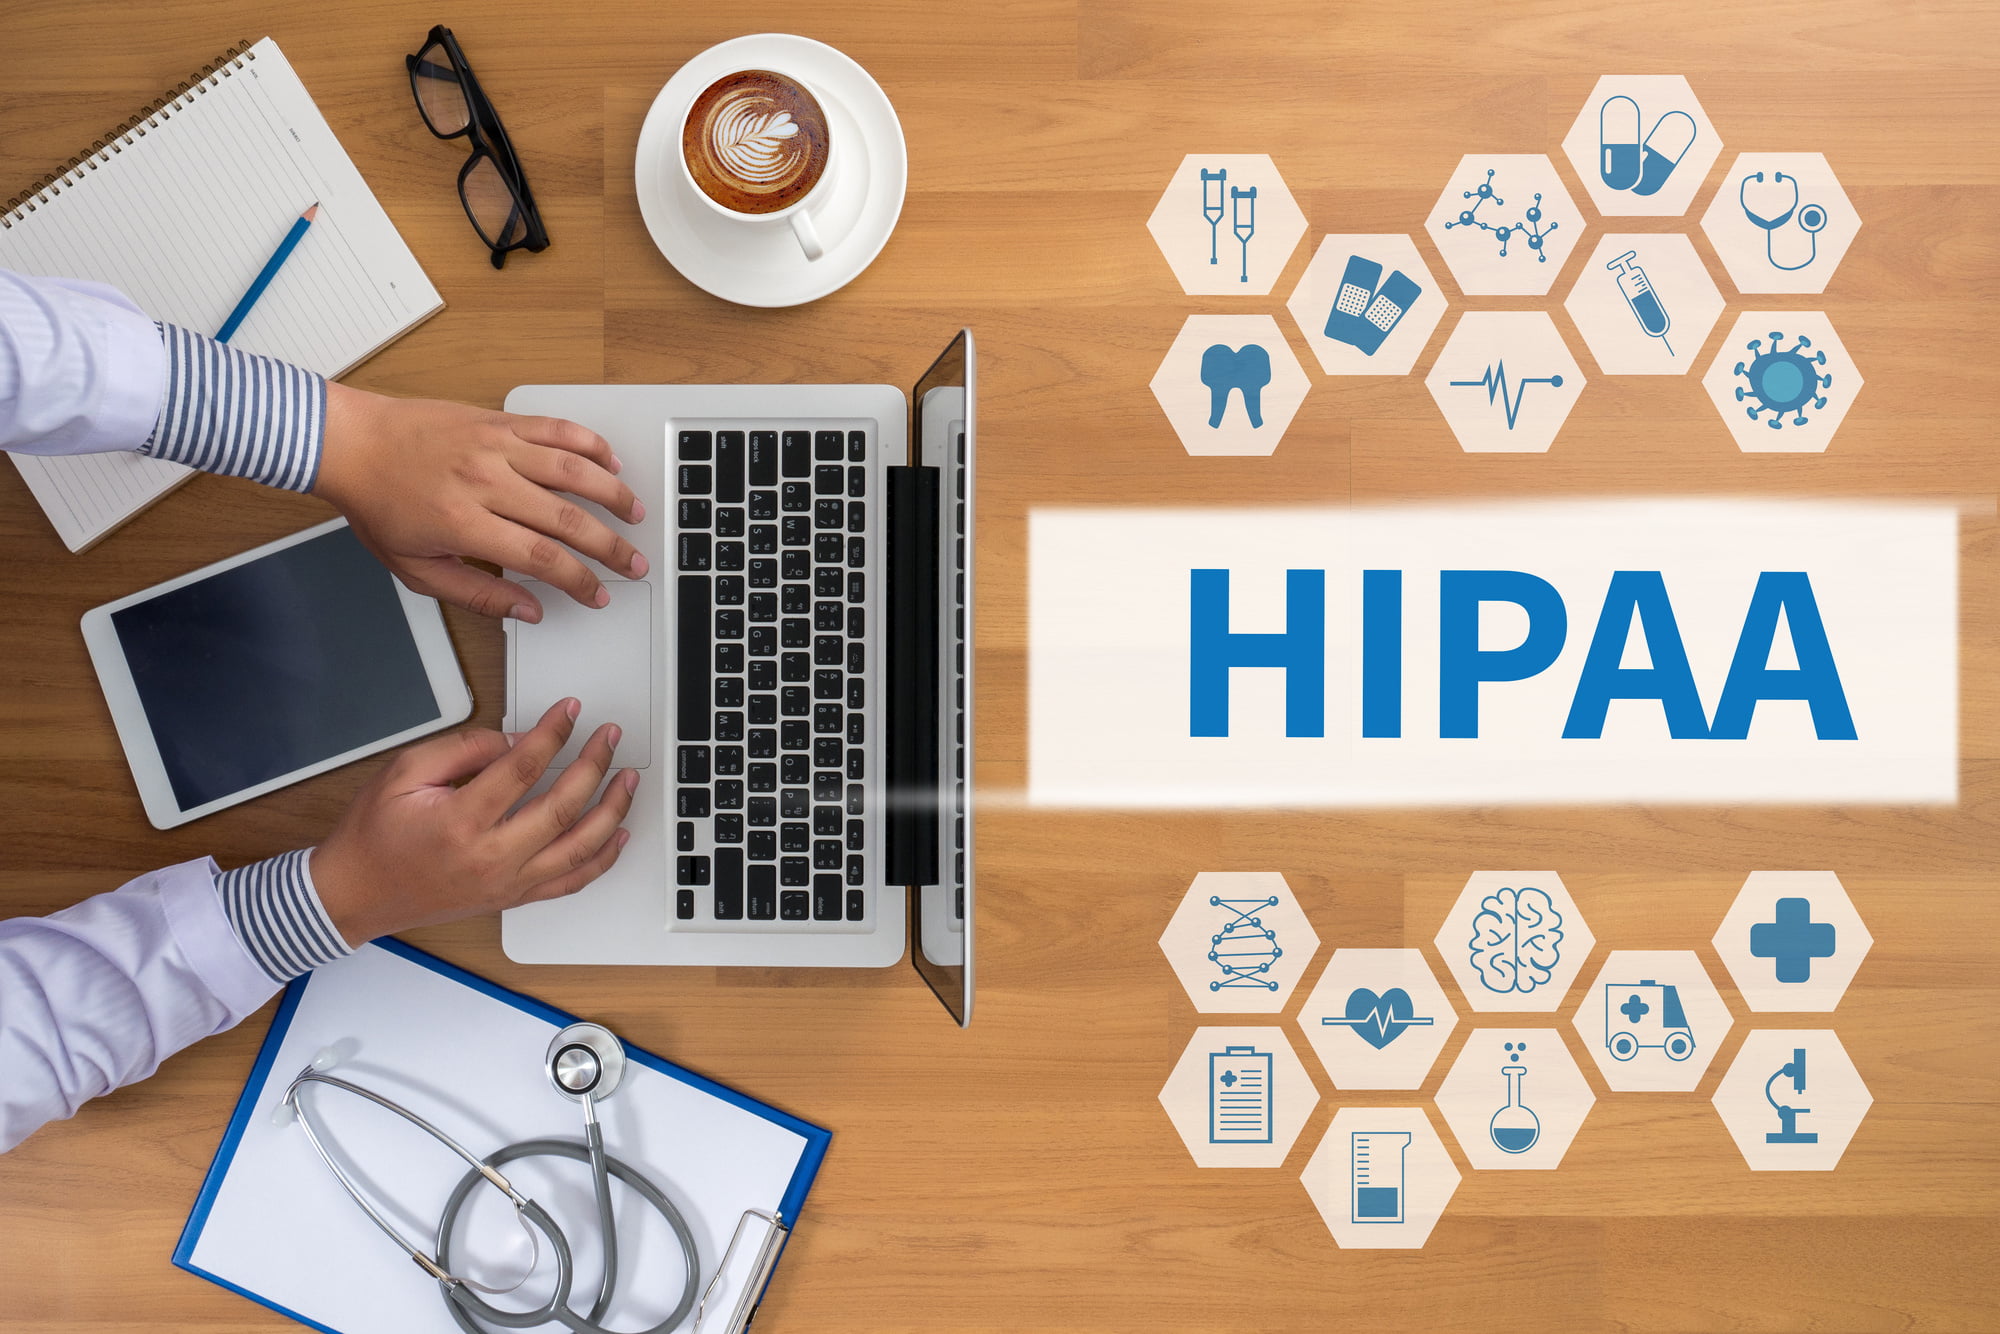 Chances are you've encountered HIPAA rules at some point in your life. But what is HIPAA and why is it important? We explain the basics here!